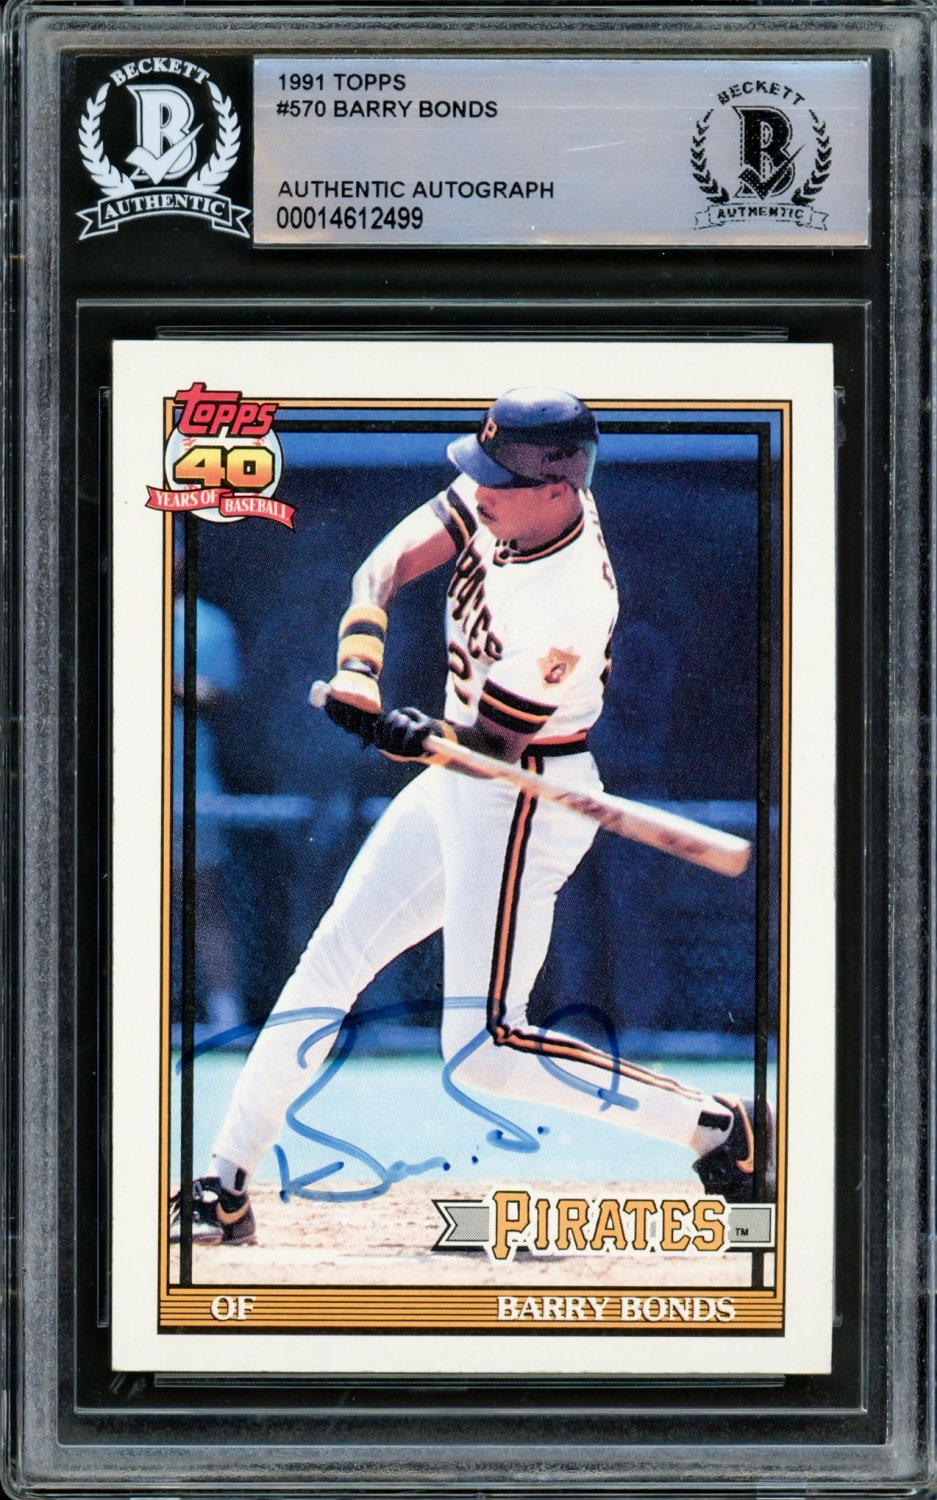 Barry Bonds Autographed Signed 1991 Topps Card #570 Pittsburgh